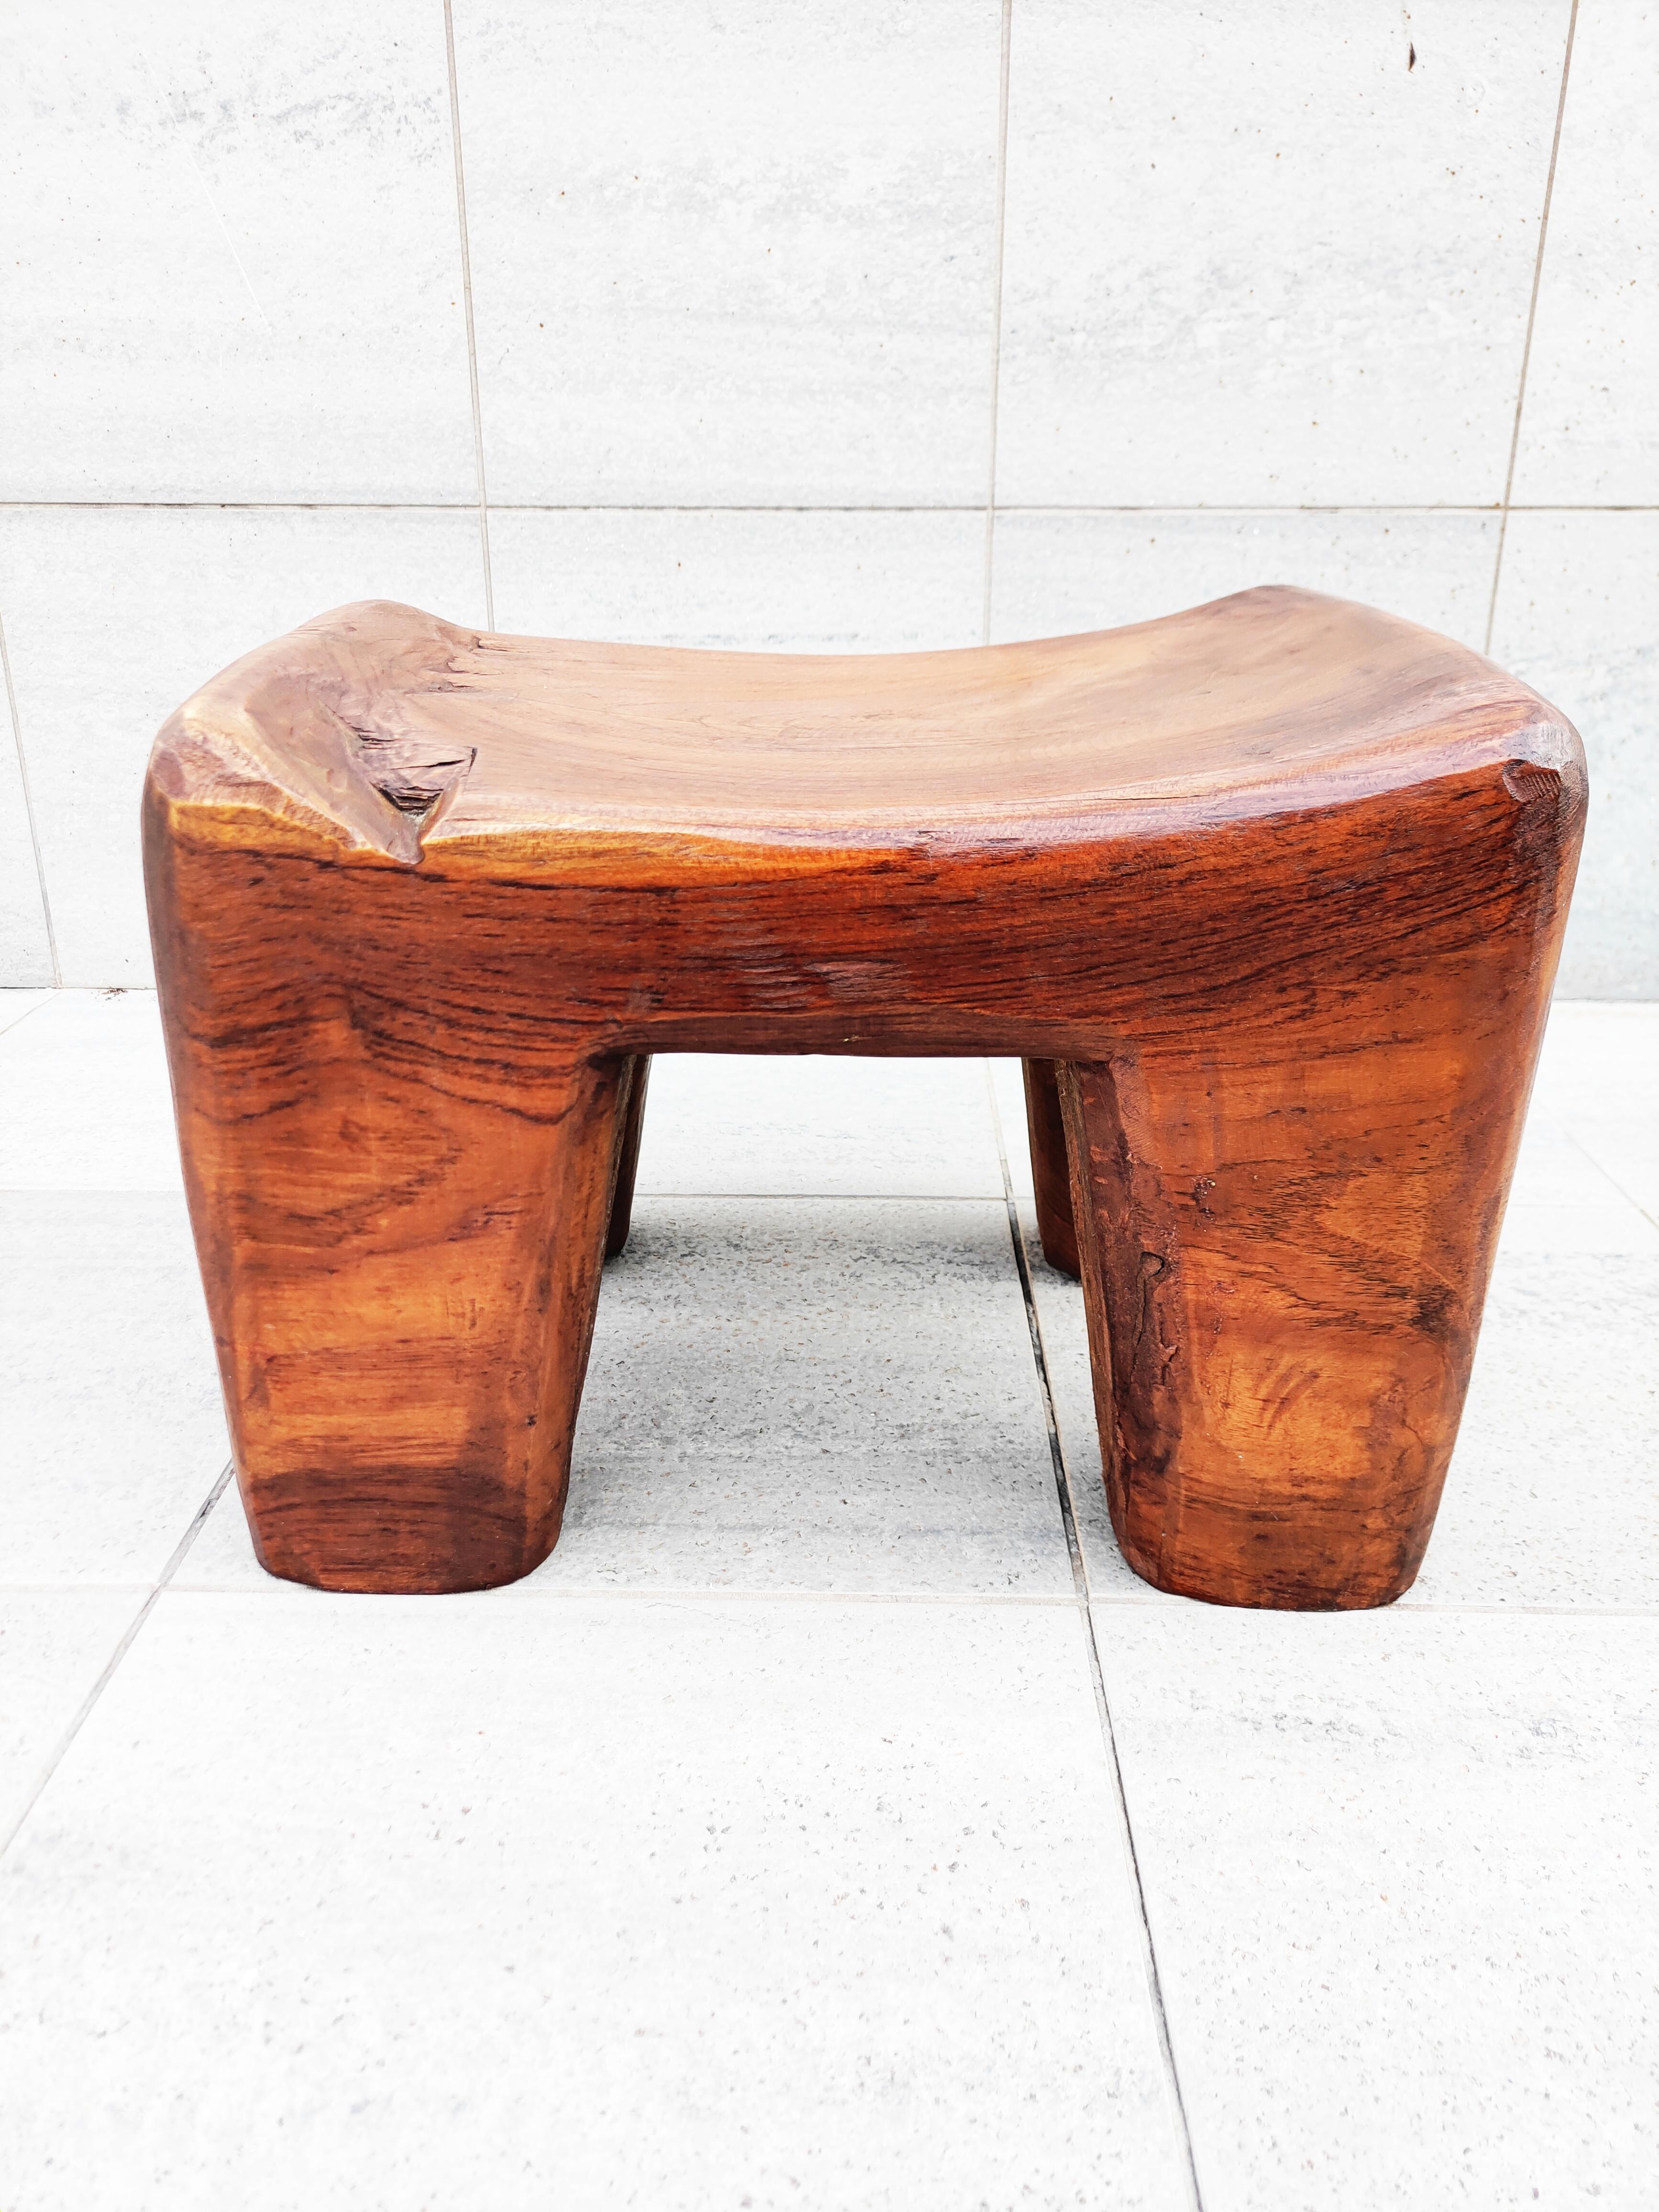 Beautiful and rare massive Brutalist olive wood stool, handmade in Spain in 1960s.
Comfortable and very heavy.